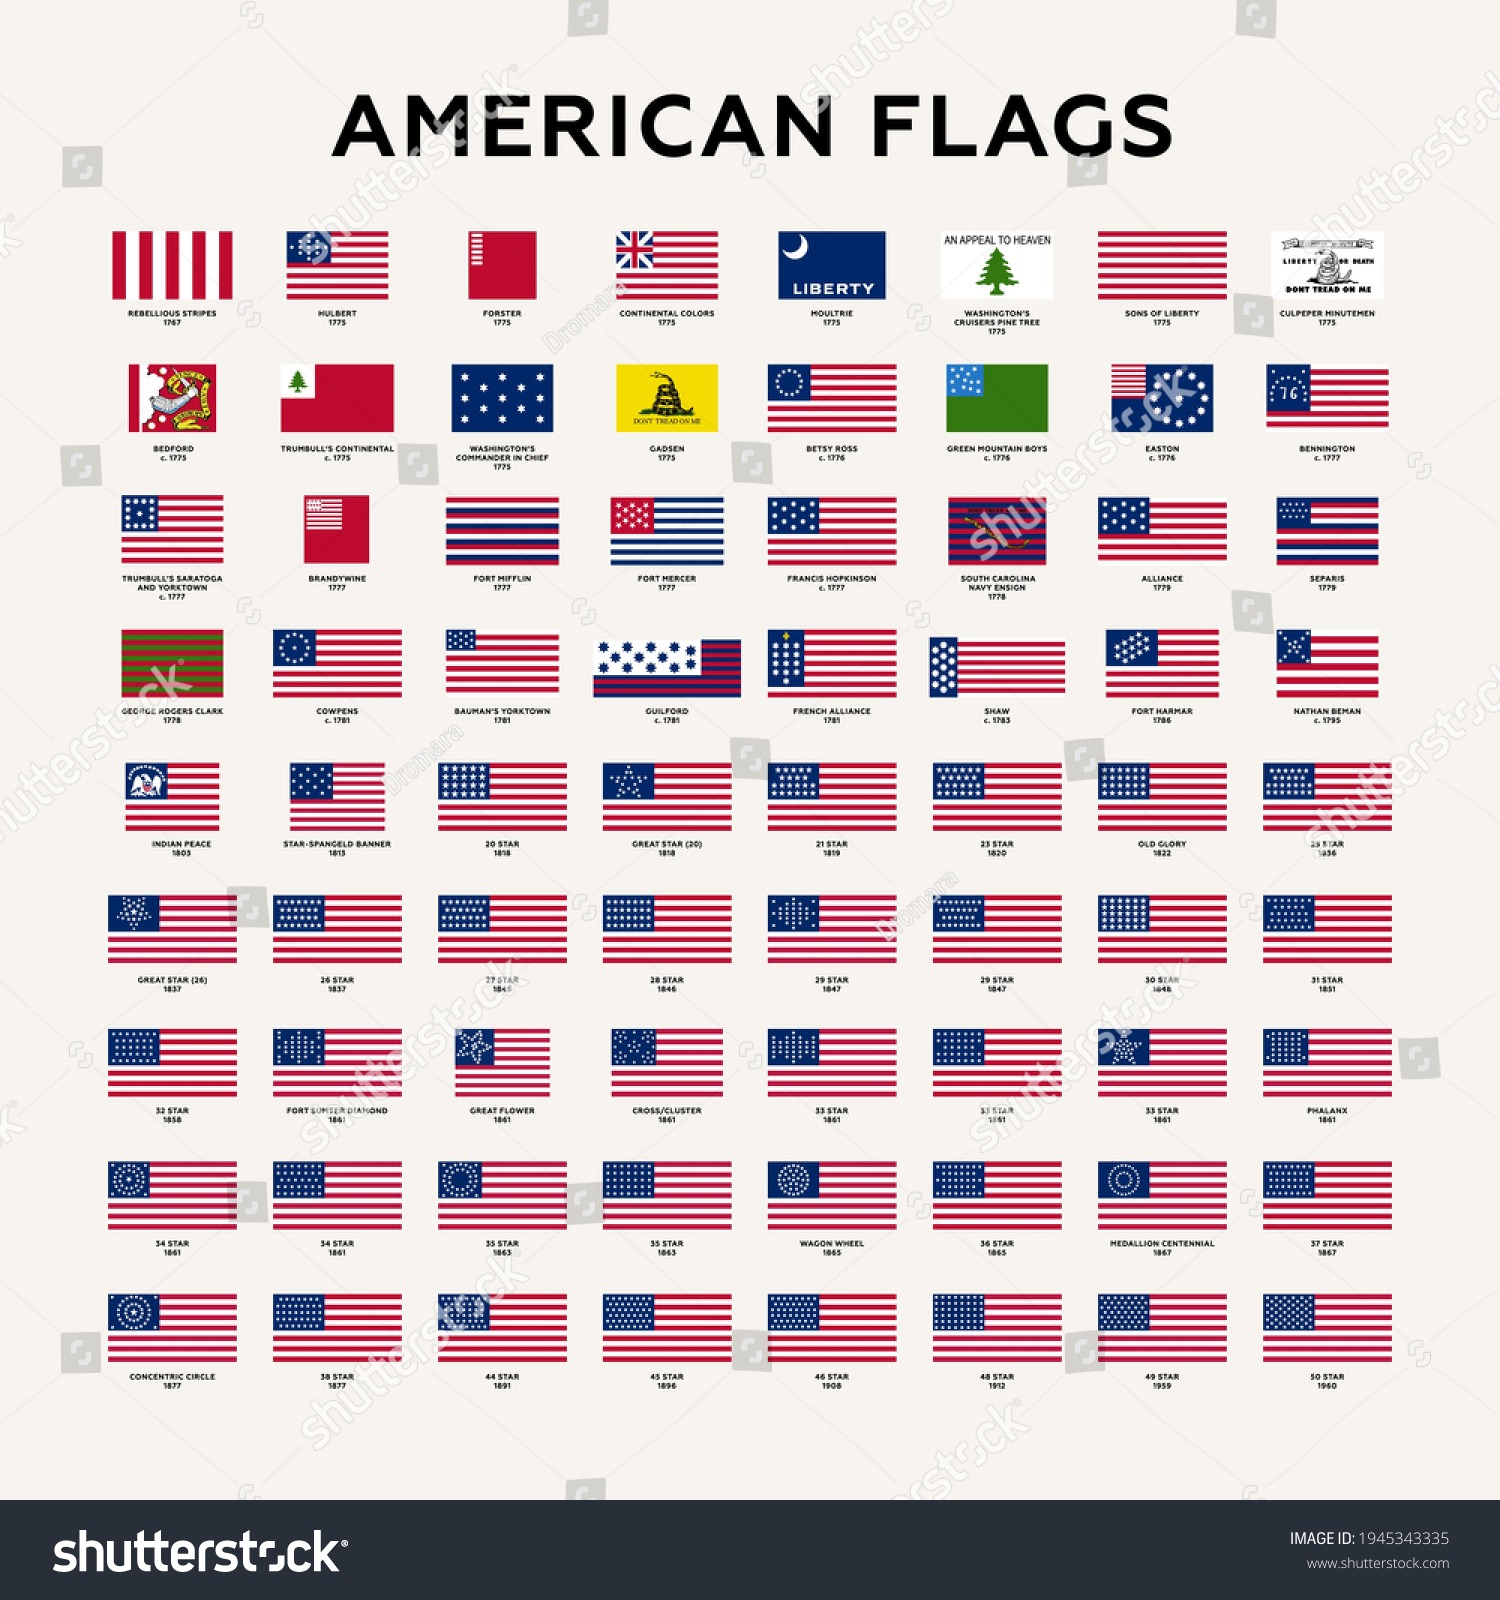 SVG of Vector illustration with a history of the flags of the United States of America from 1777 to 1960. svg